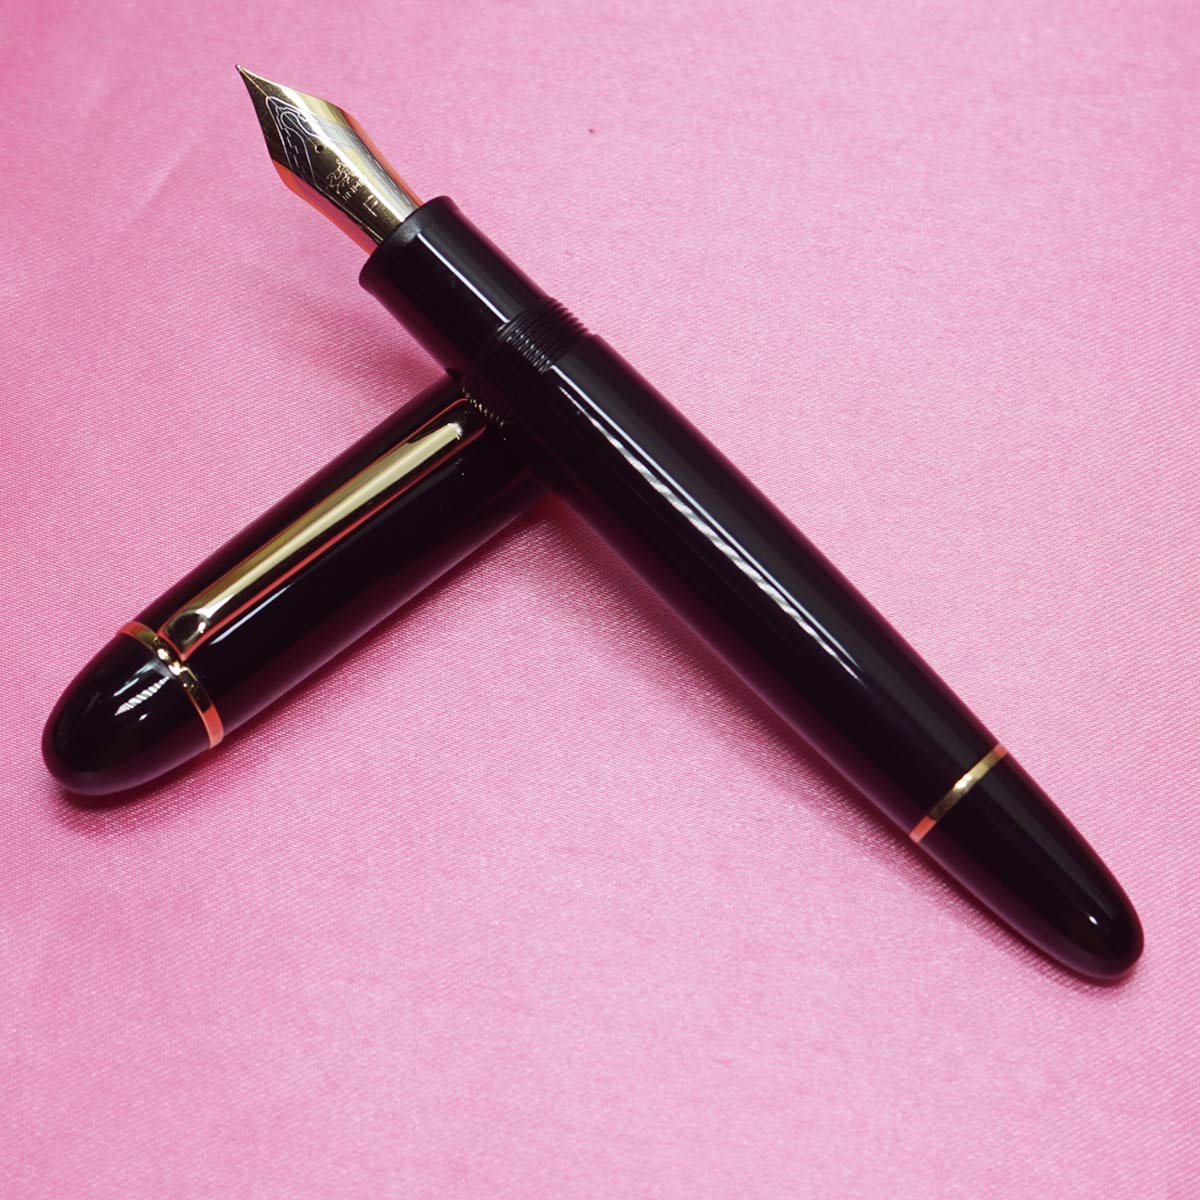 Jinhao X159 Glossy Black Color Body With No 40 Fine tipped  Nib With Gold Trims Converter Type Fountain Pen SKU 21543